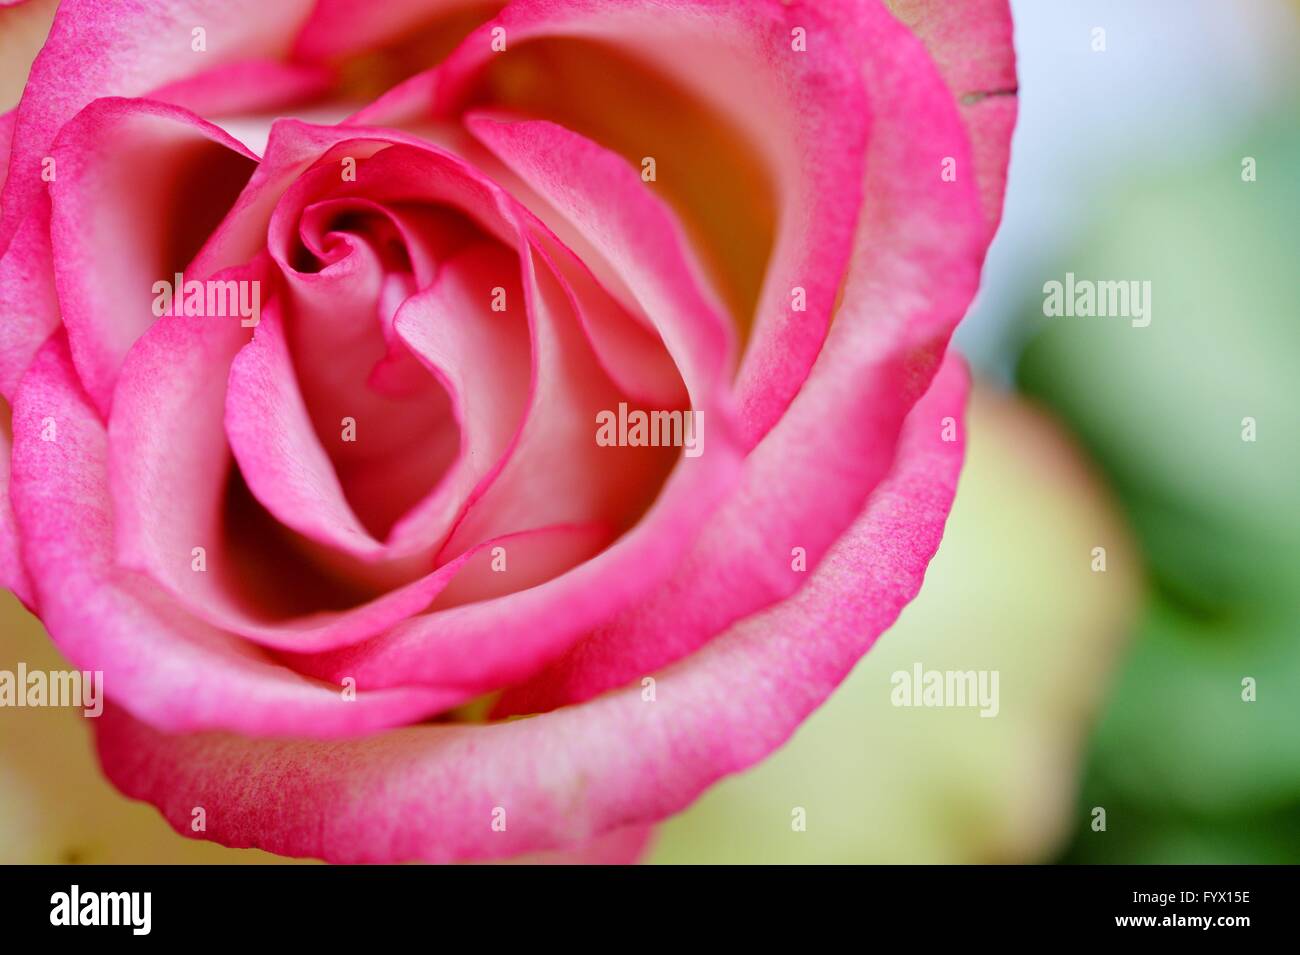 Closeup of a pink rose flower, Germany, city of Osterode, 28. April 2016. Photo: Frank May Stock Photo